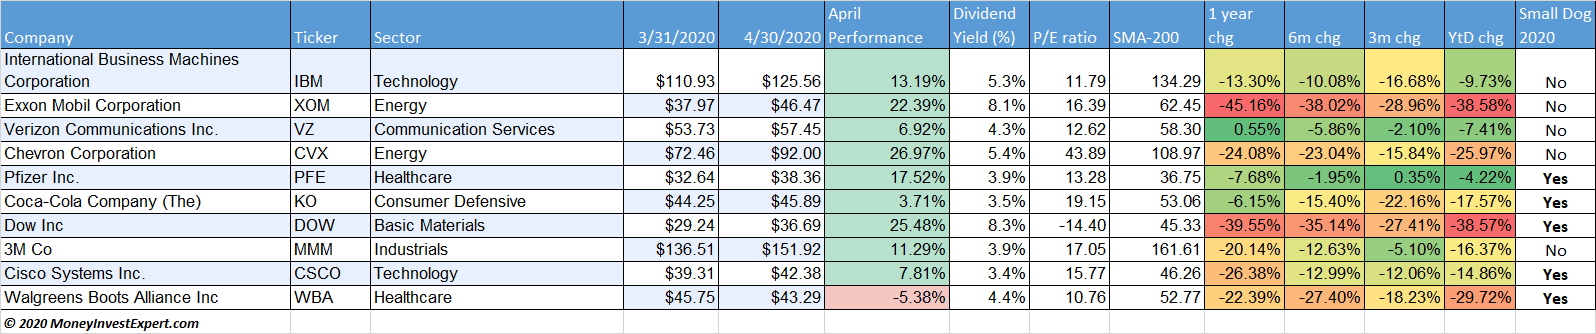 dogs-of-the-dow-performance-may-2020